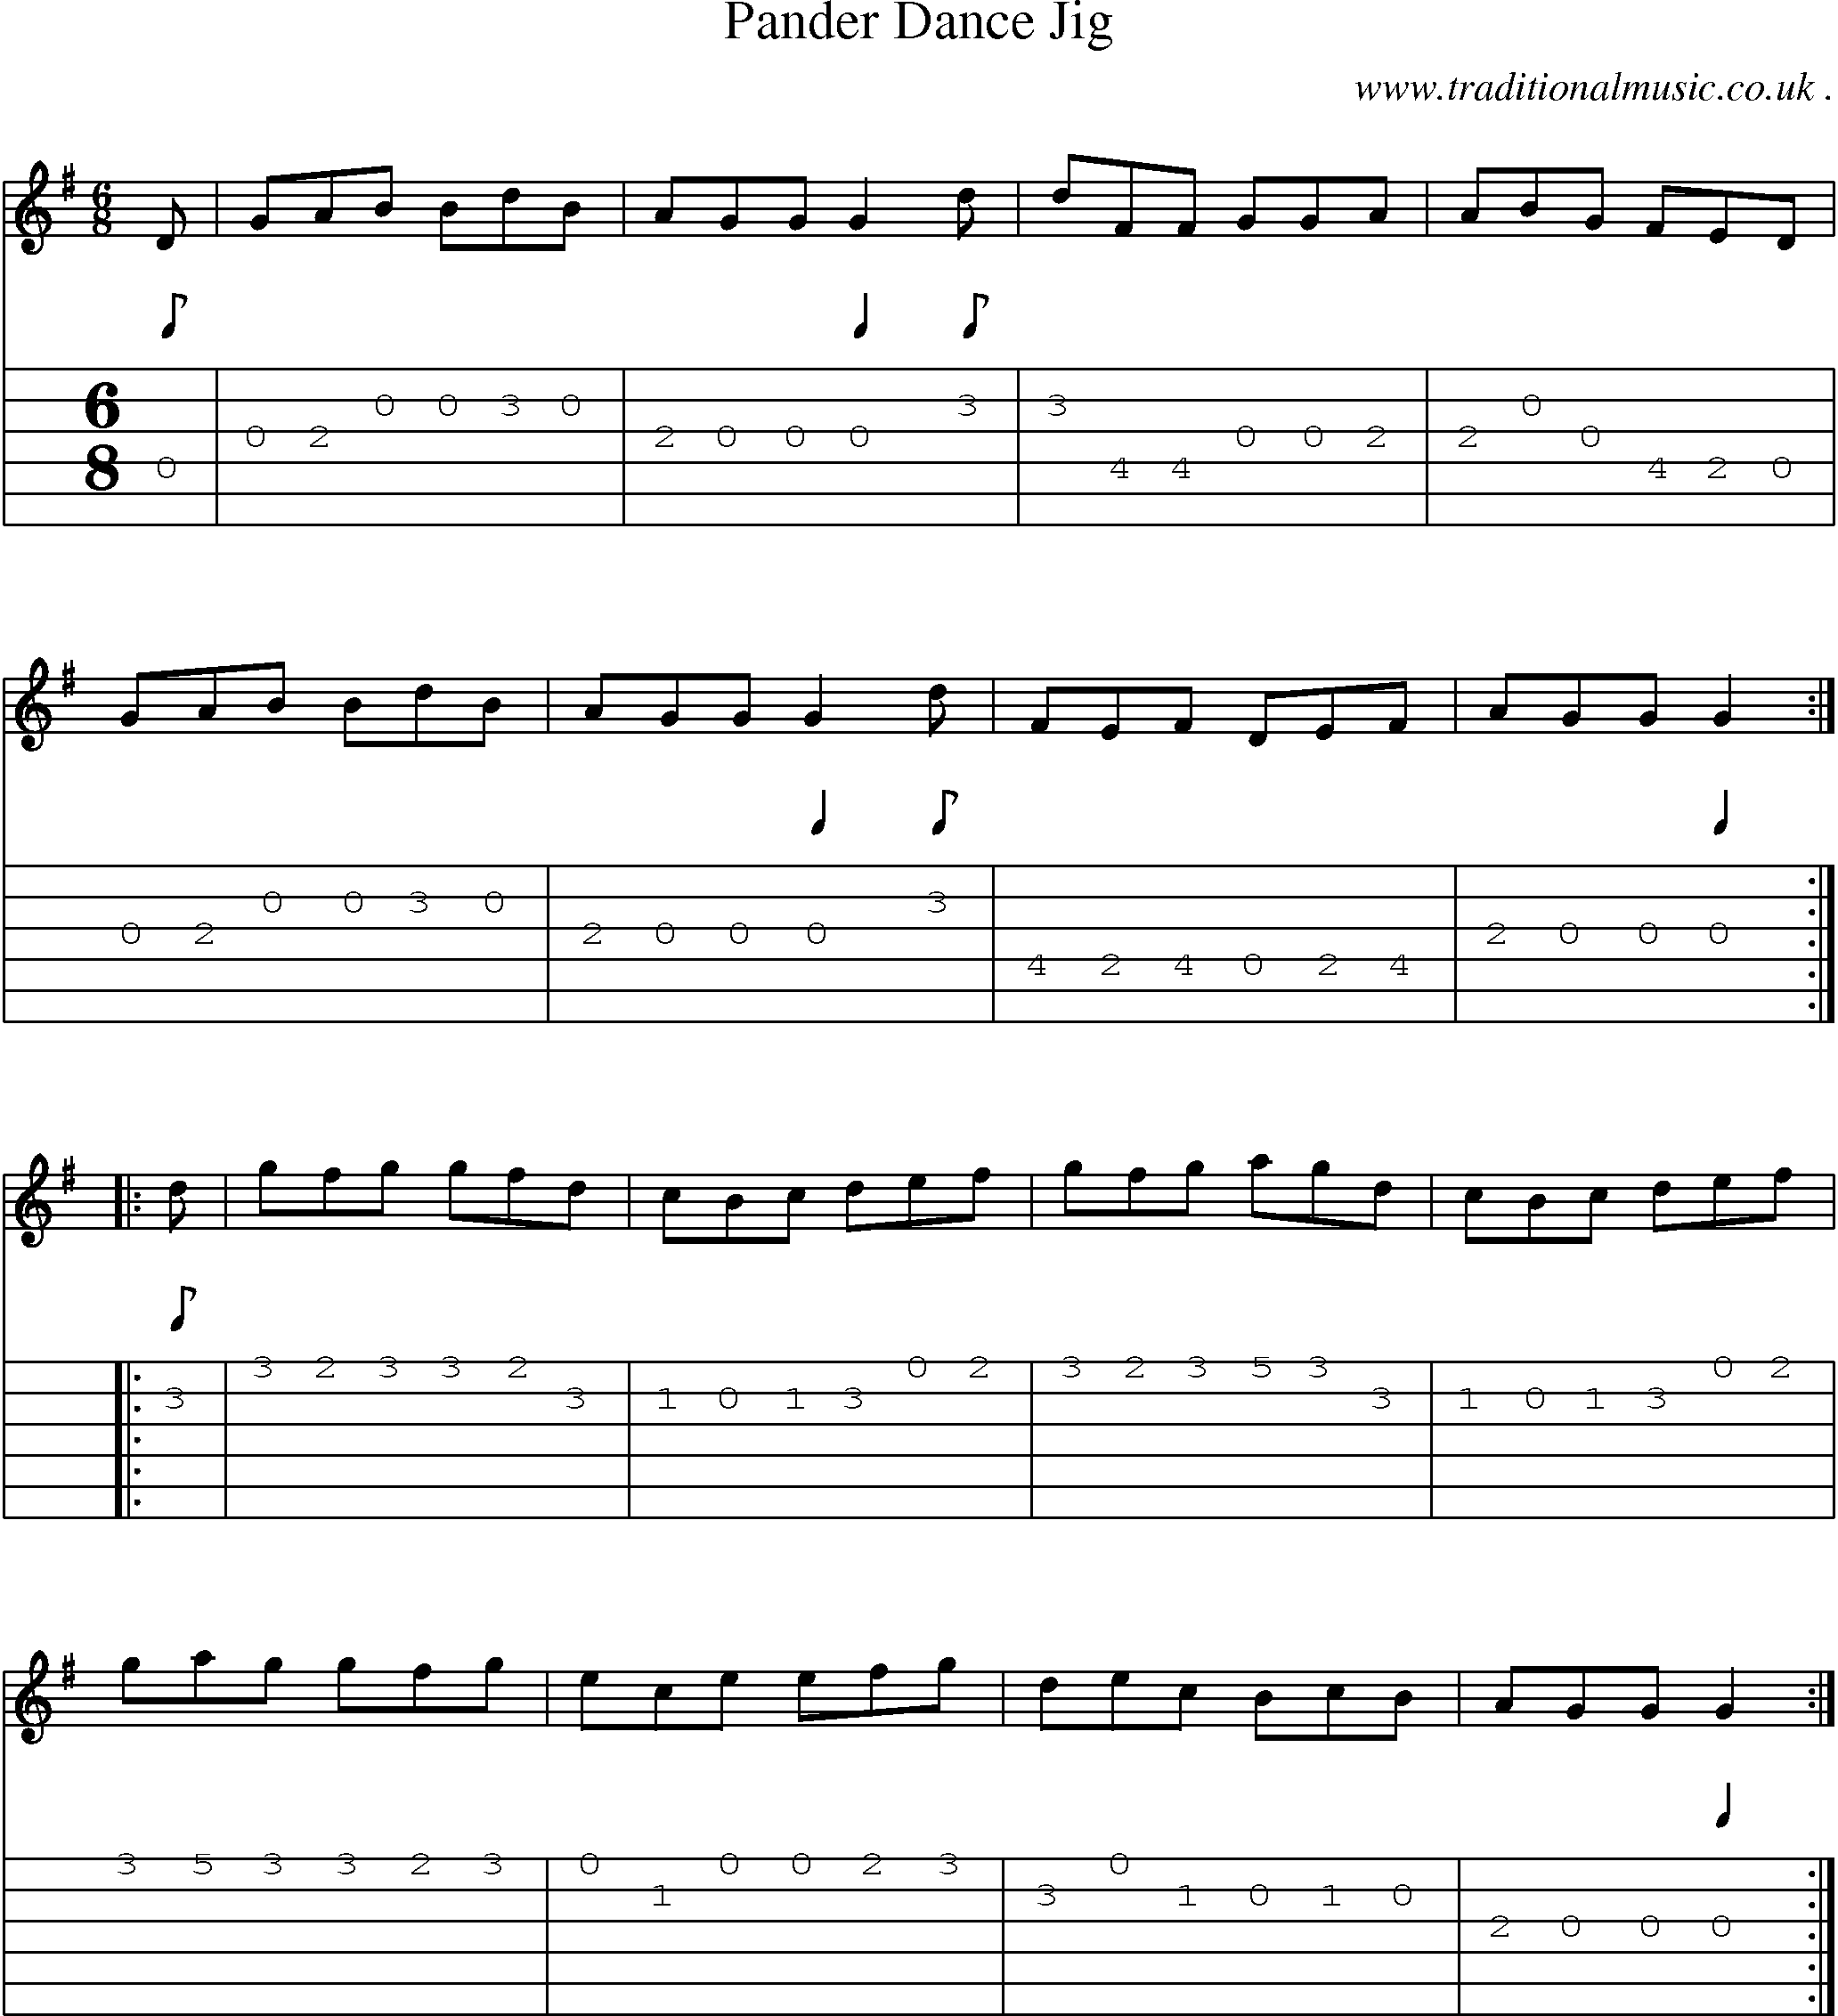 Sheet-Music and Guitar Tabs for Pander Dance Jig